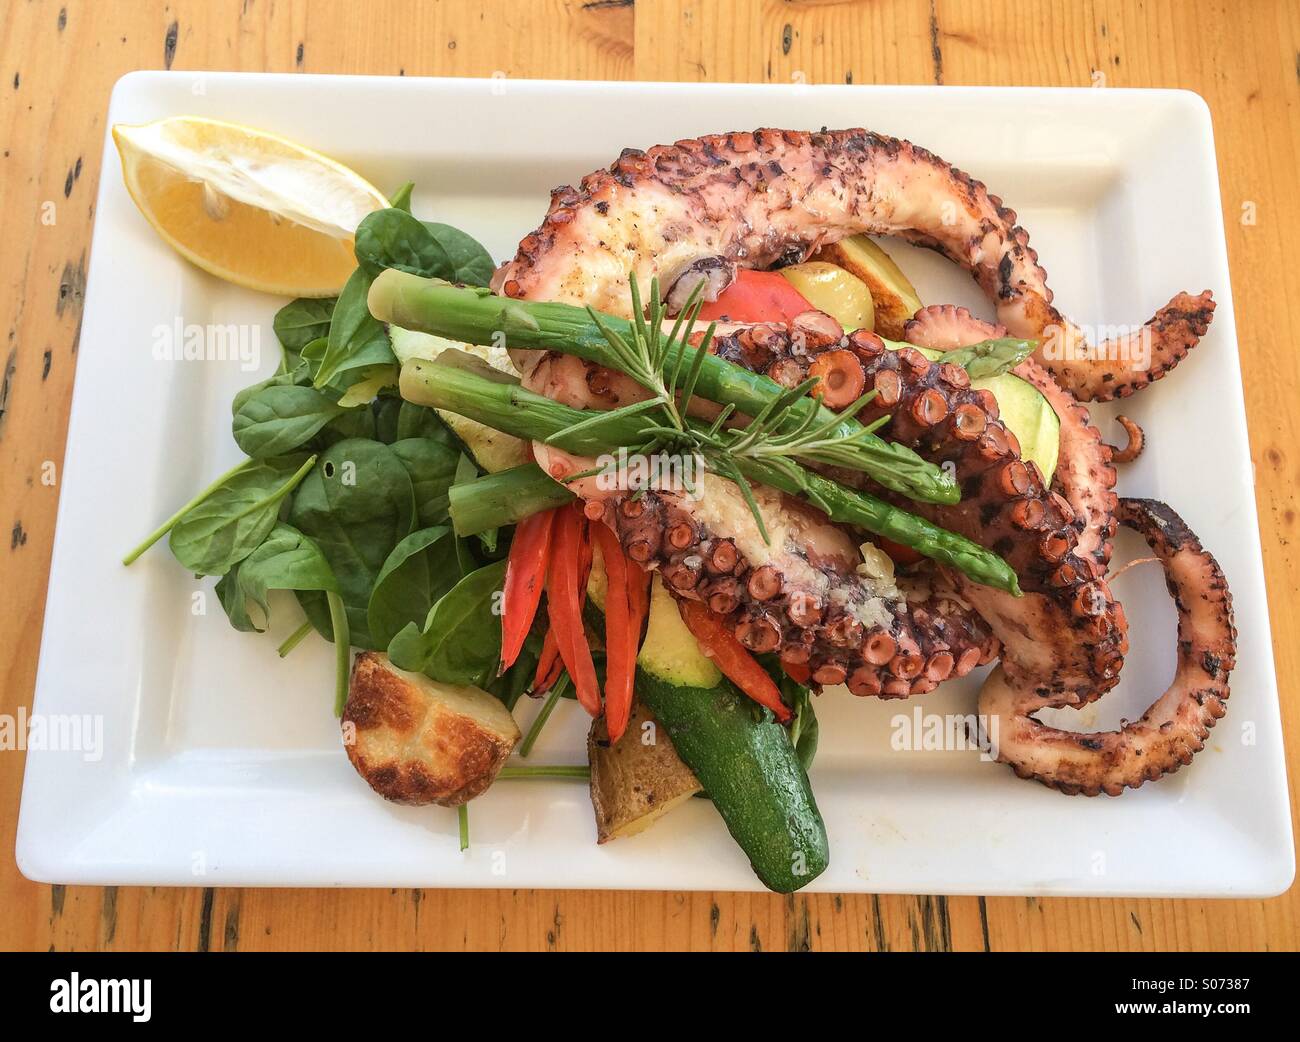 Mediterranean style grilled octopus tentacles with vegetables Stock Photo